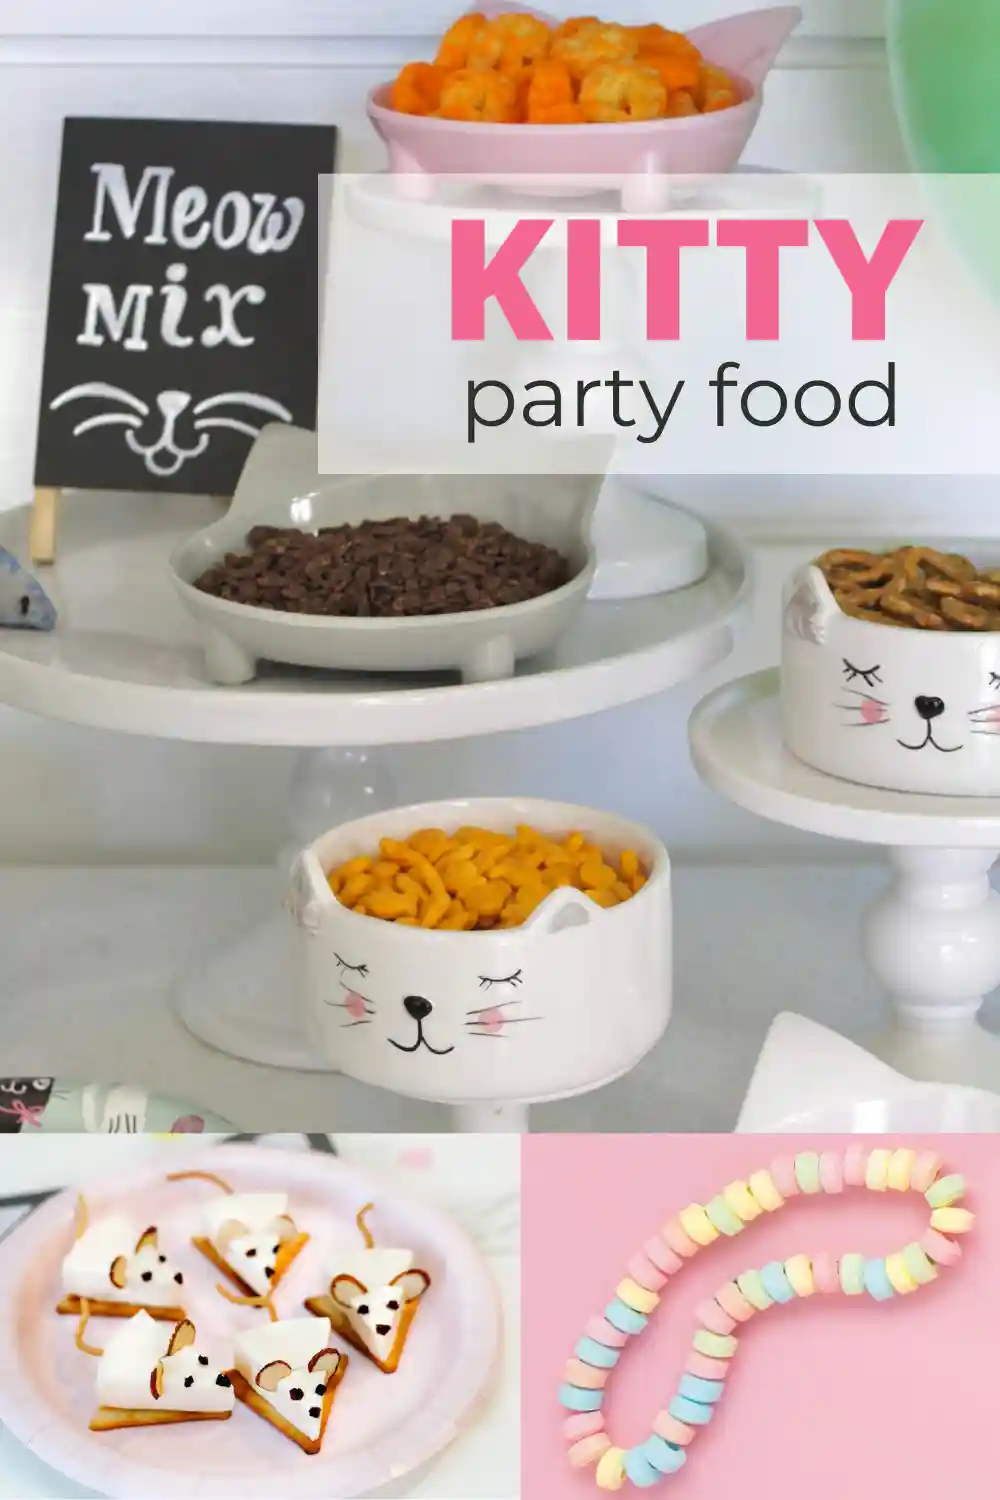 Gabby's Dollhouse party food ideas for the best birthday. Includes ideas for meow mix, cupcakes, cookies, cat shaped sandwiches, cat pizza, kitty cat collars, yarn balls, mouse cheese wedges, and more! Easy ideas to help you plan the food for a Gabby's Dollhouse birthday party with easy food ideas.